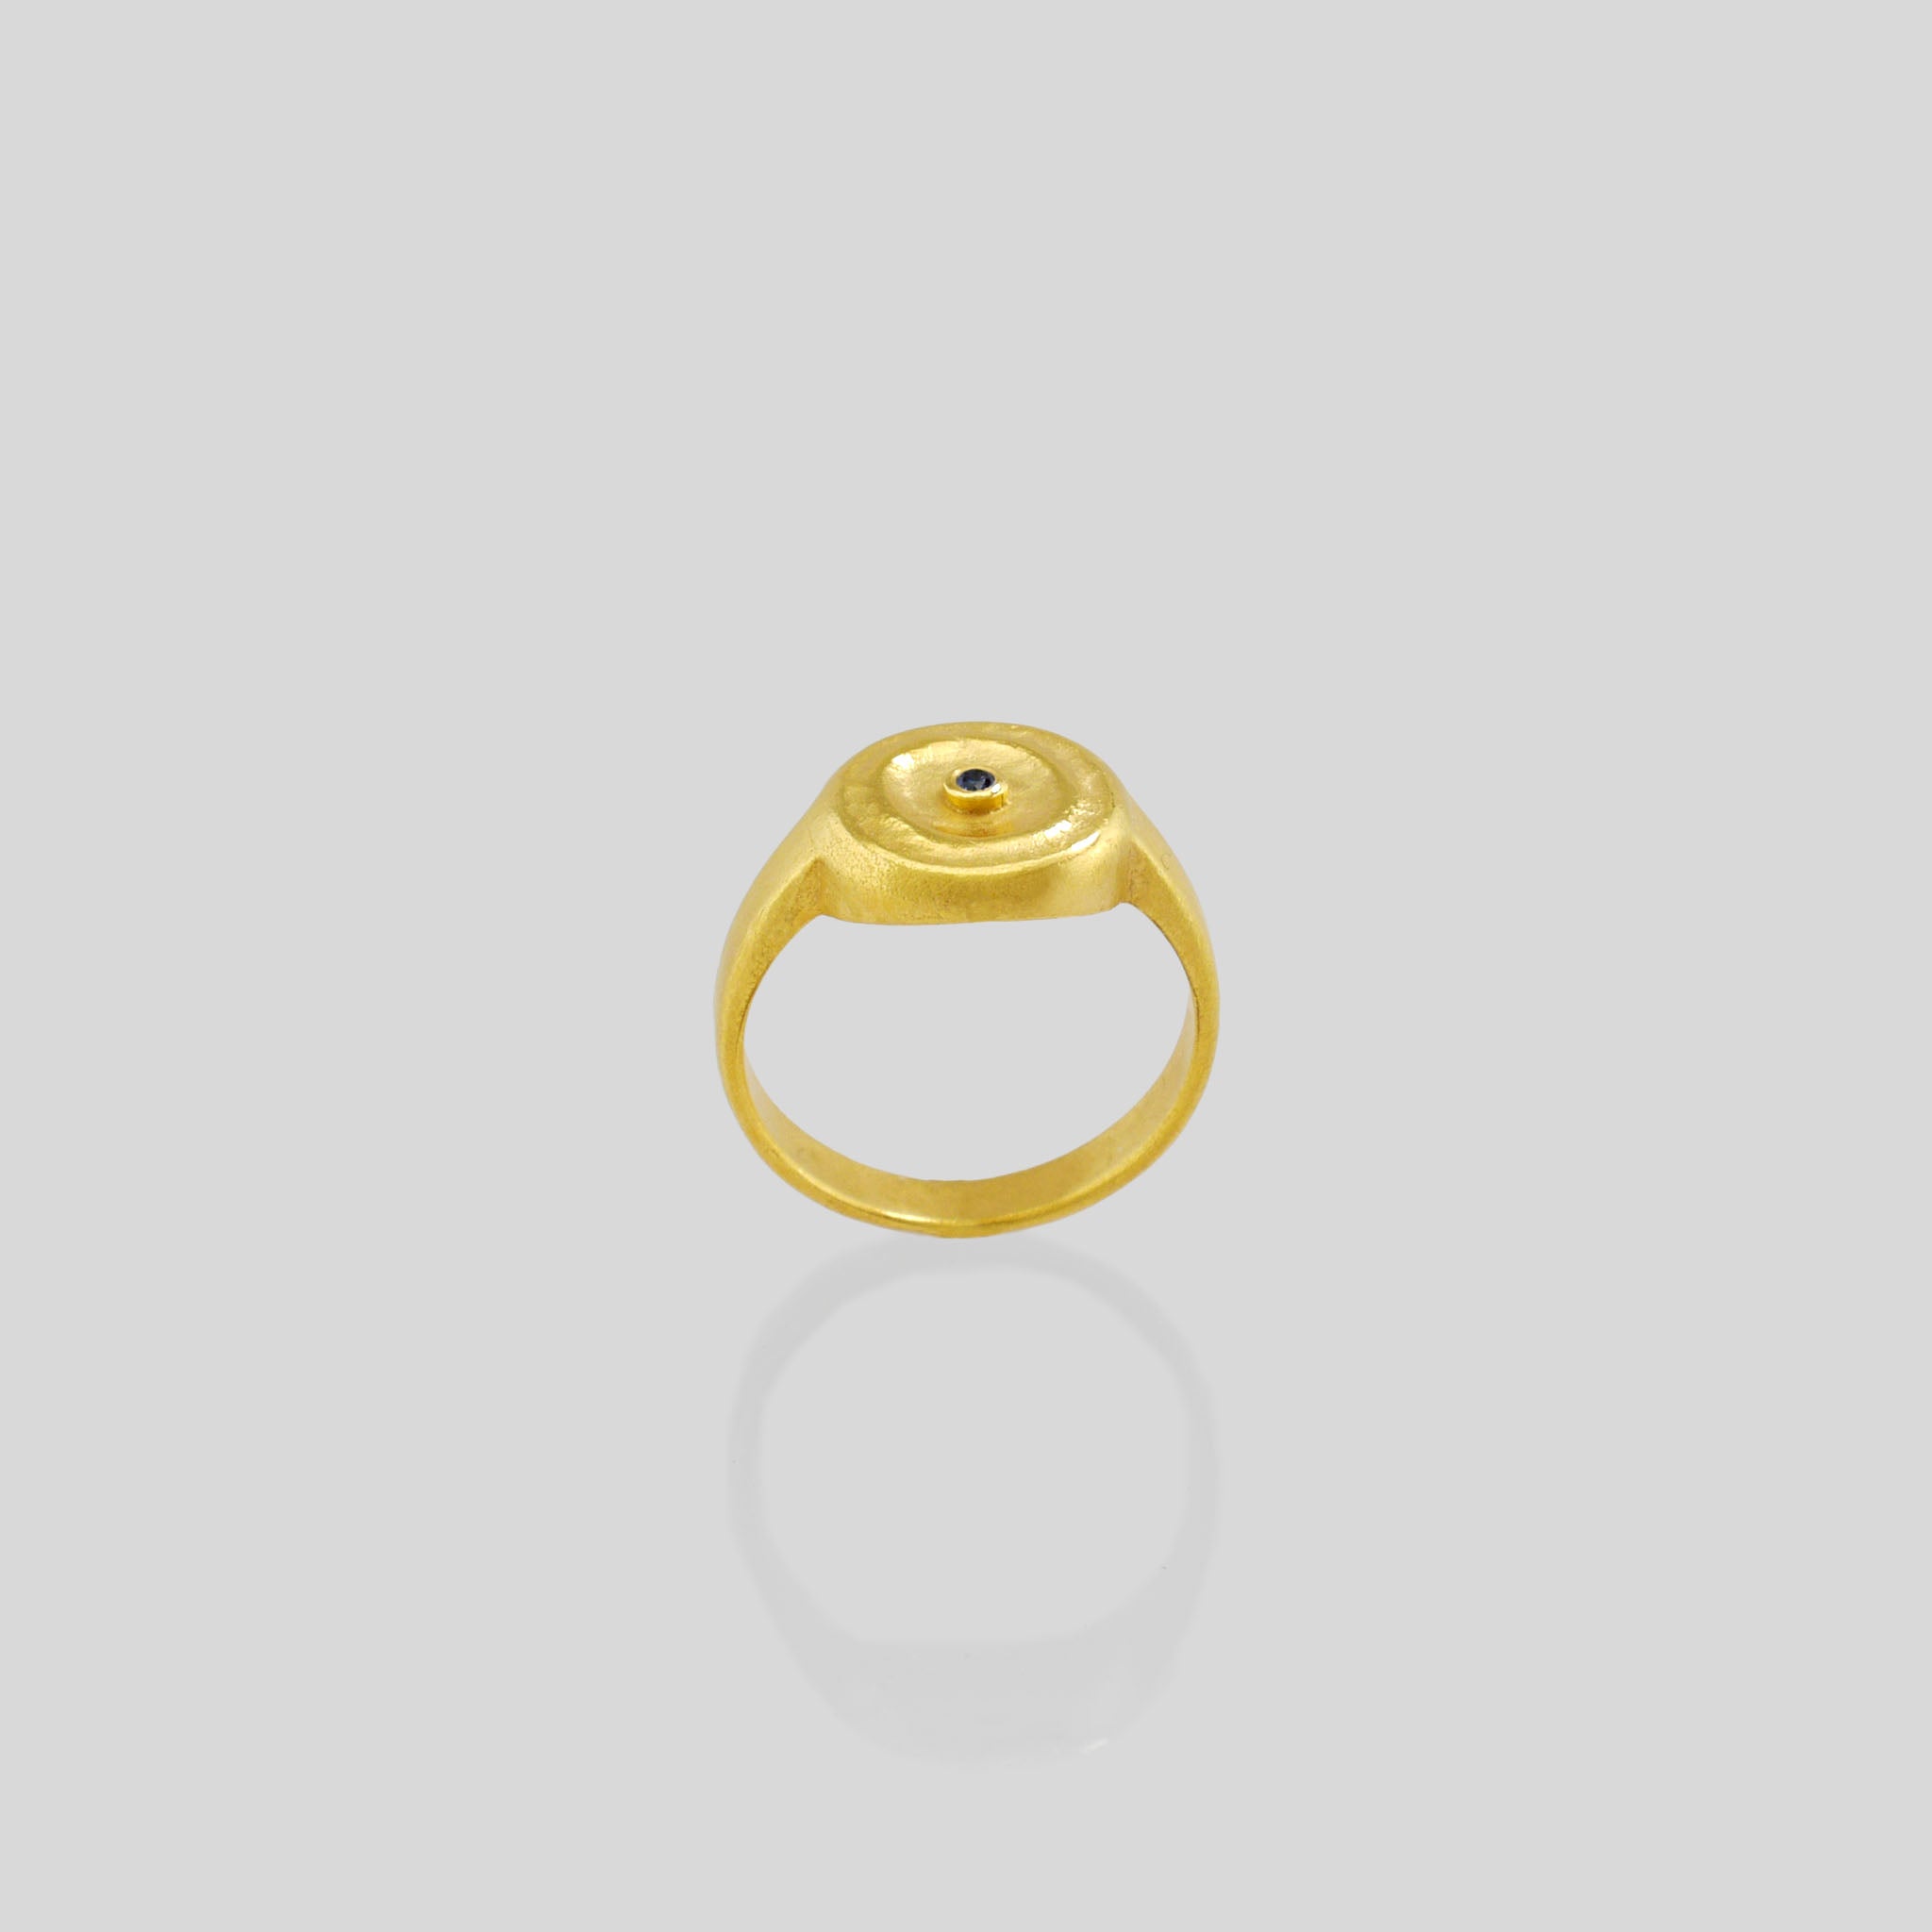 Side view of Handmade 18k Gold ring with a central Sapphire, exuding vintage charm reminiscent of the Egyptian pharaohs' era.